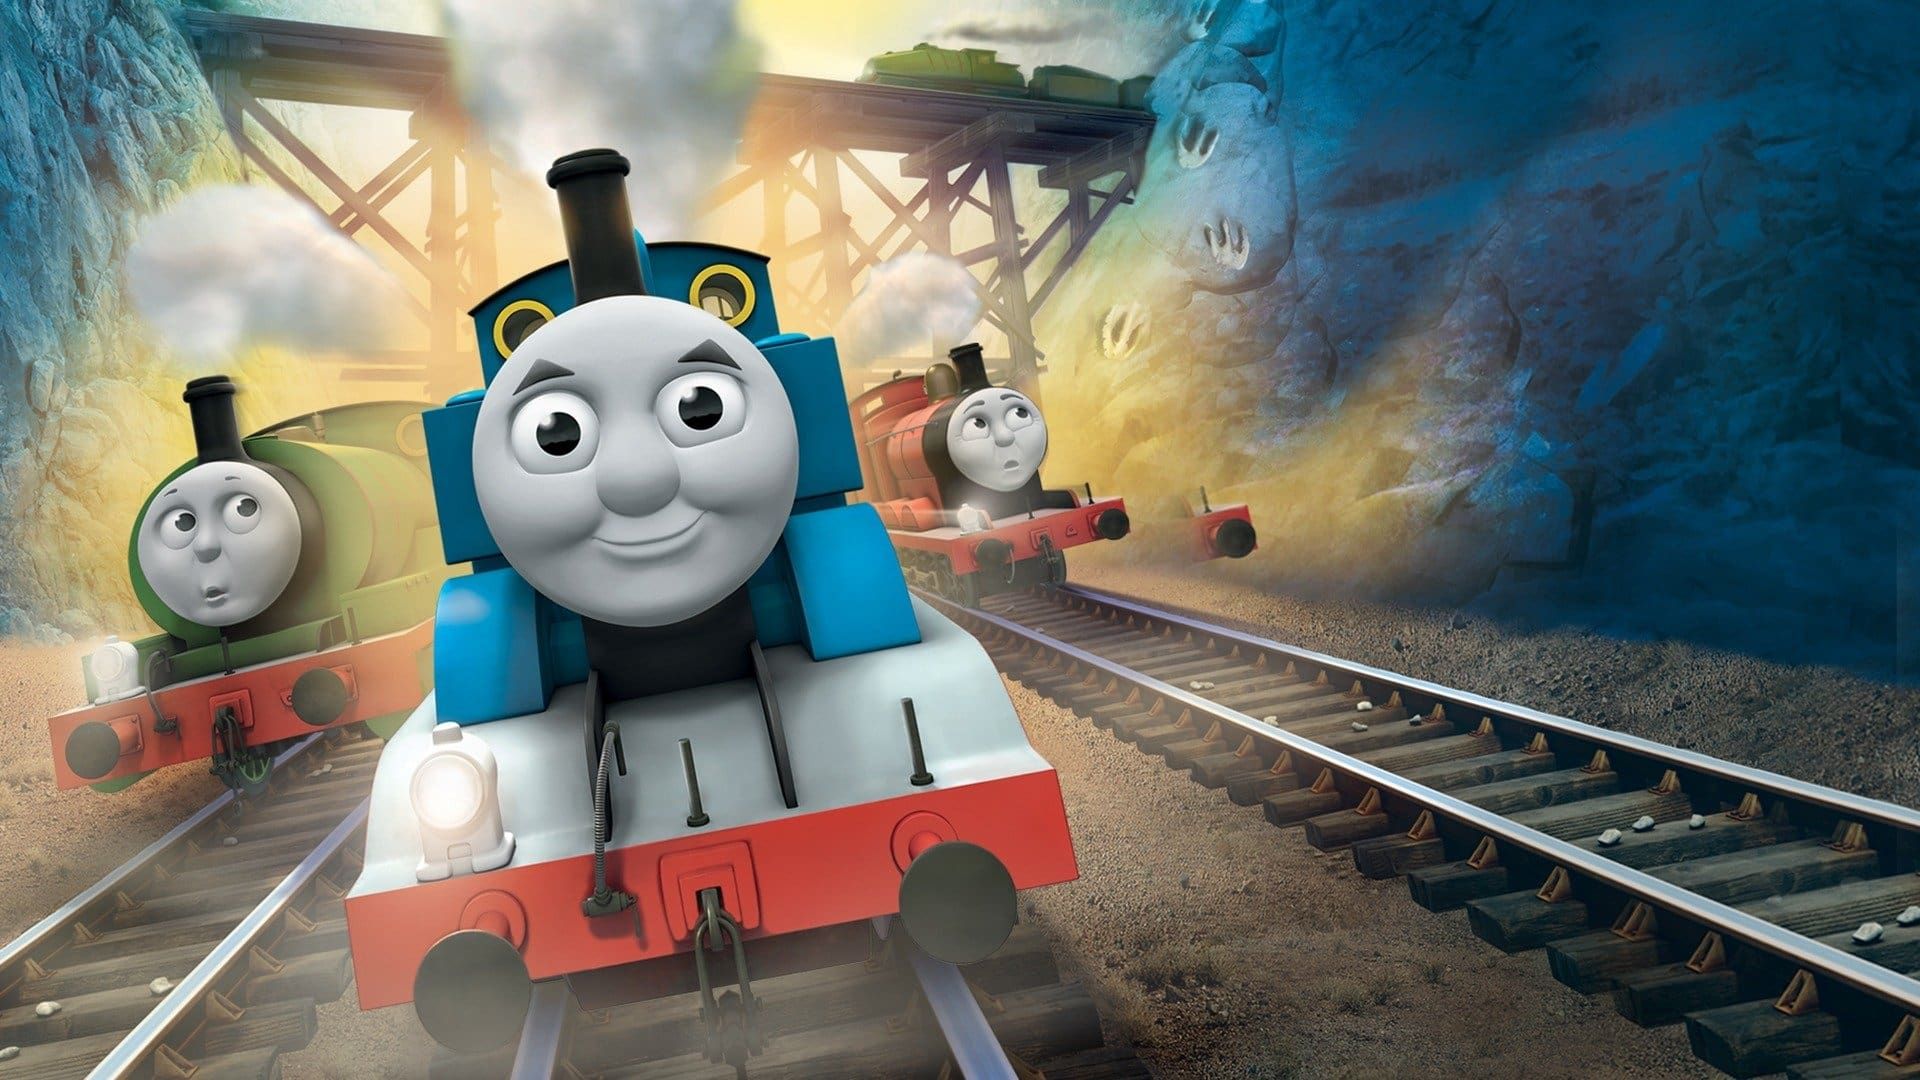 Thomas & Friends: Tale of the Brave background